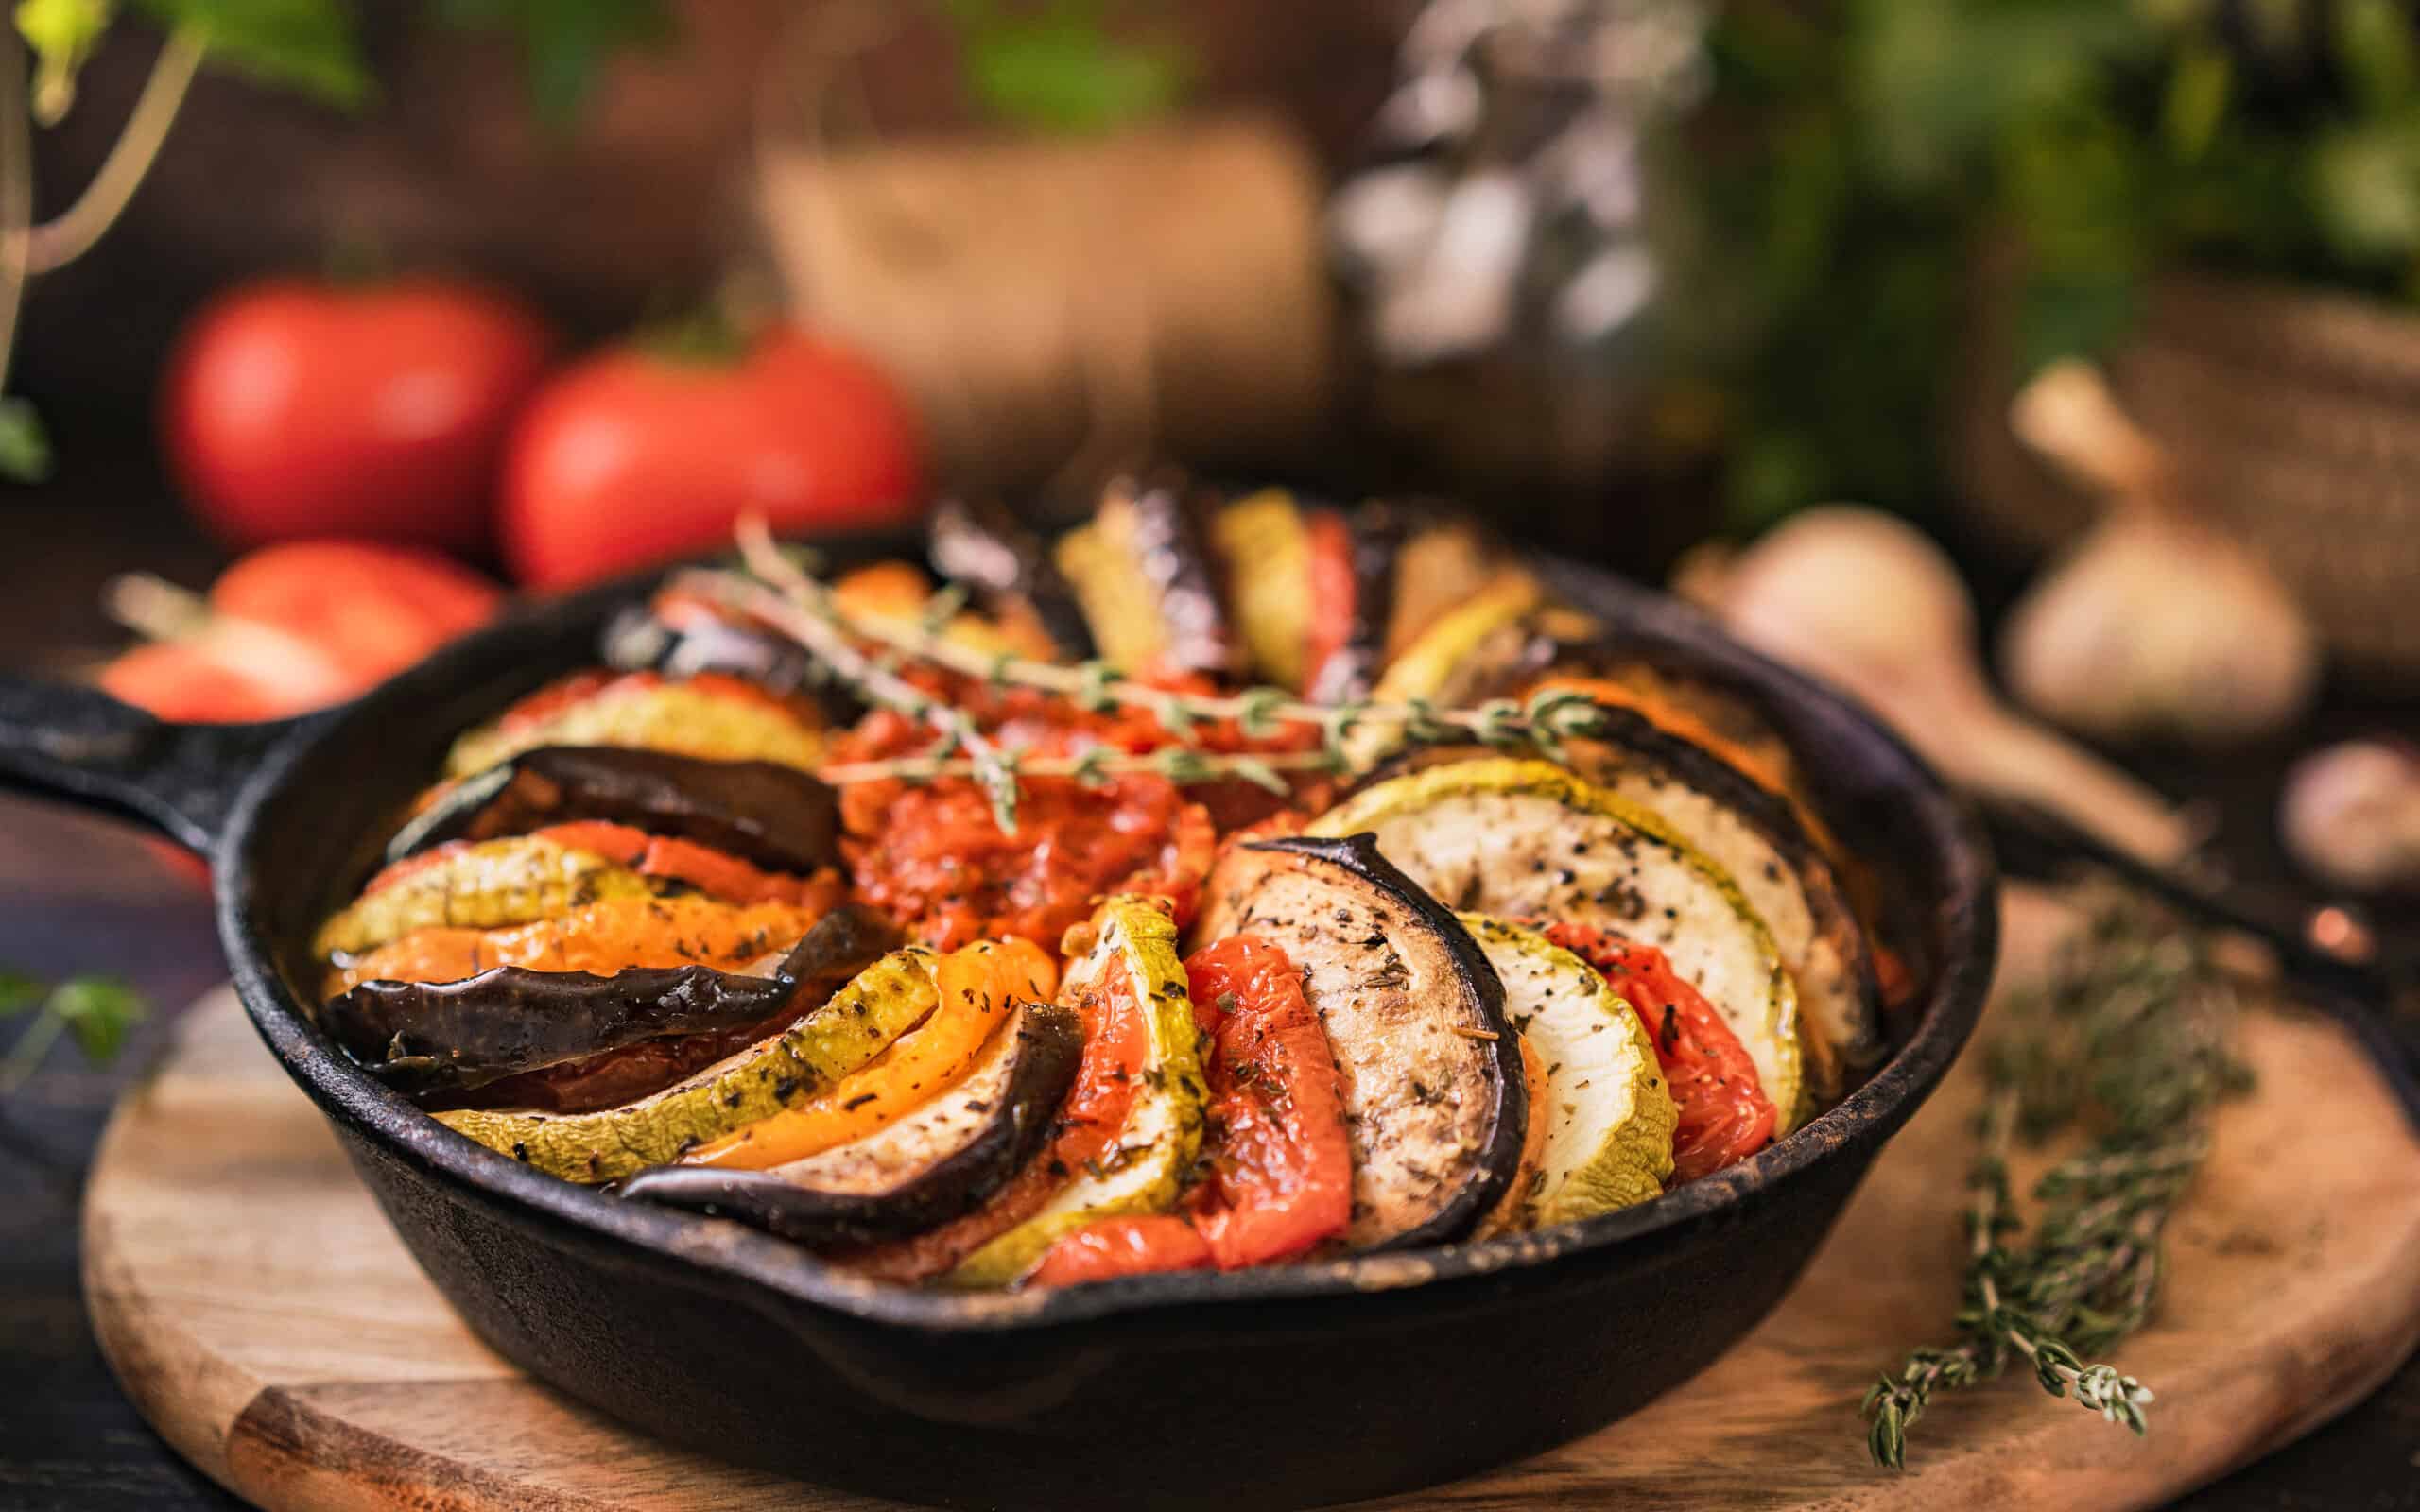 Ratatouille made of zucchini, eggplants, peppers, onions, garlic and tomatoes slices with aromatic herbs.